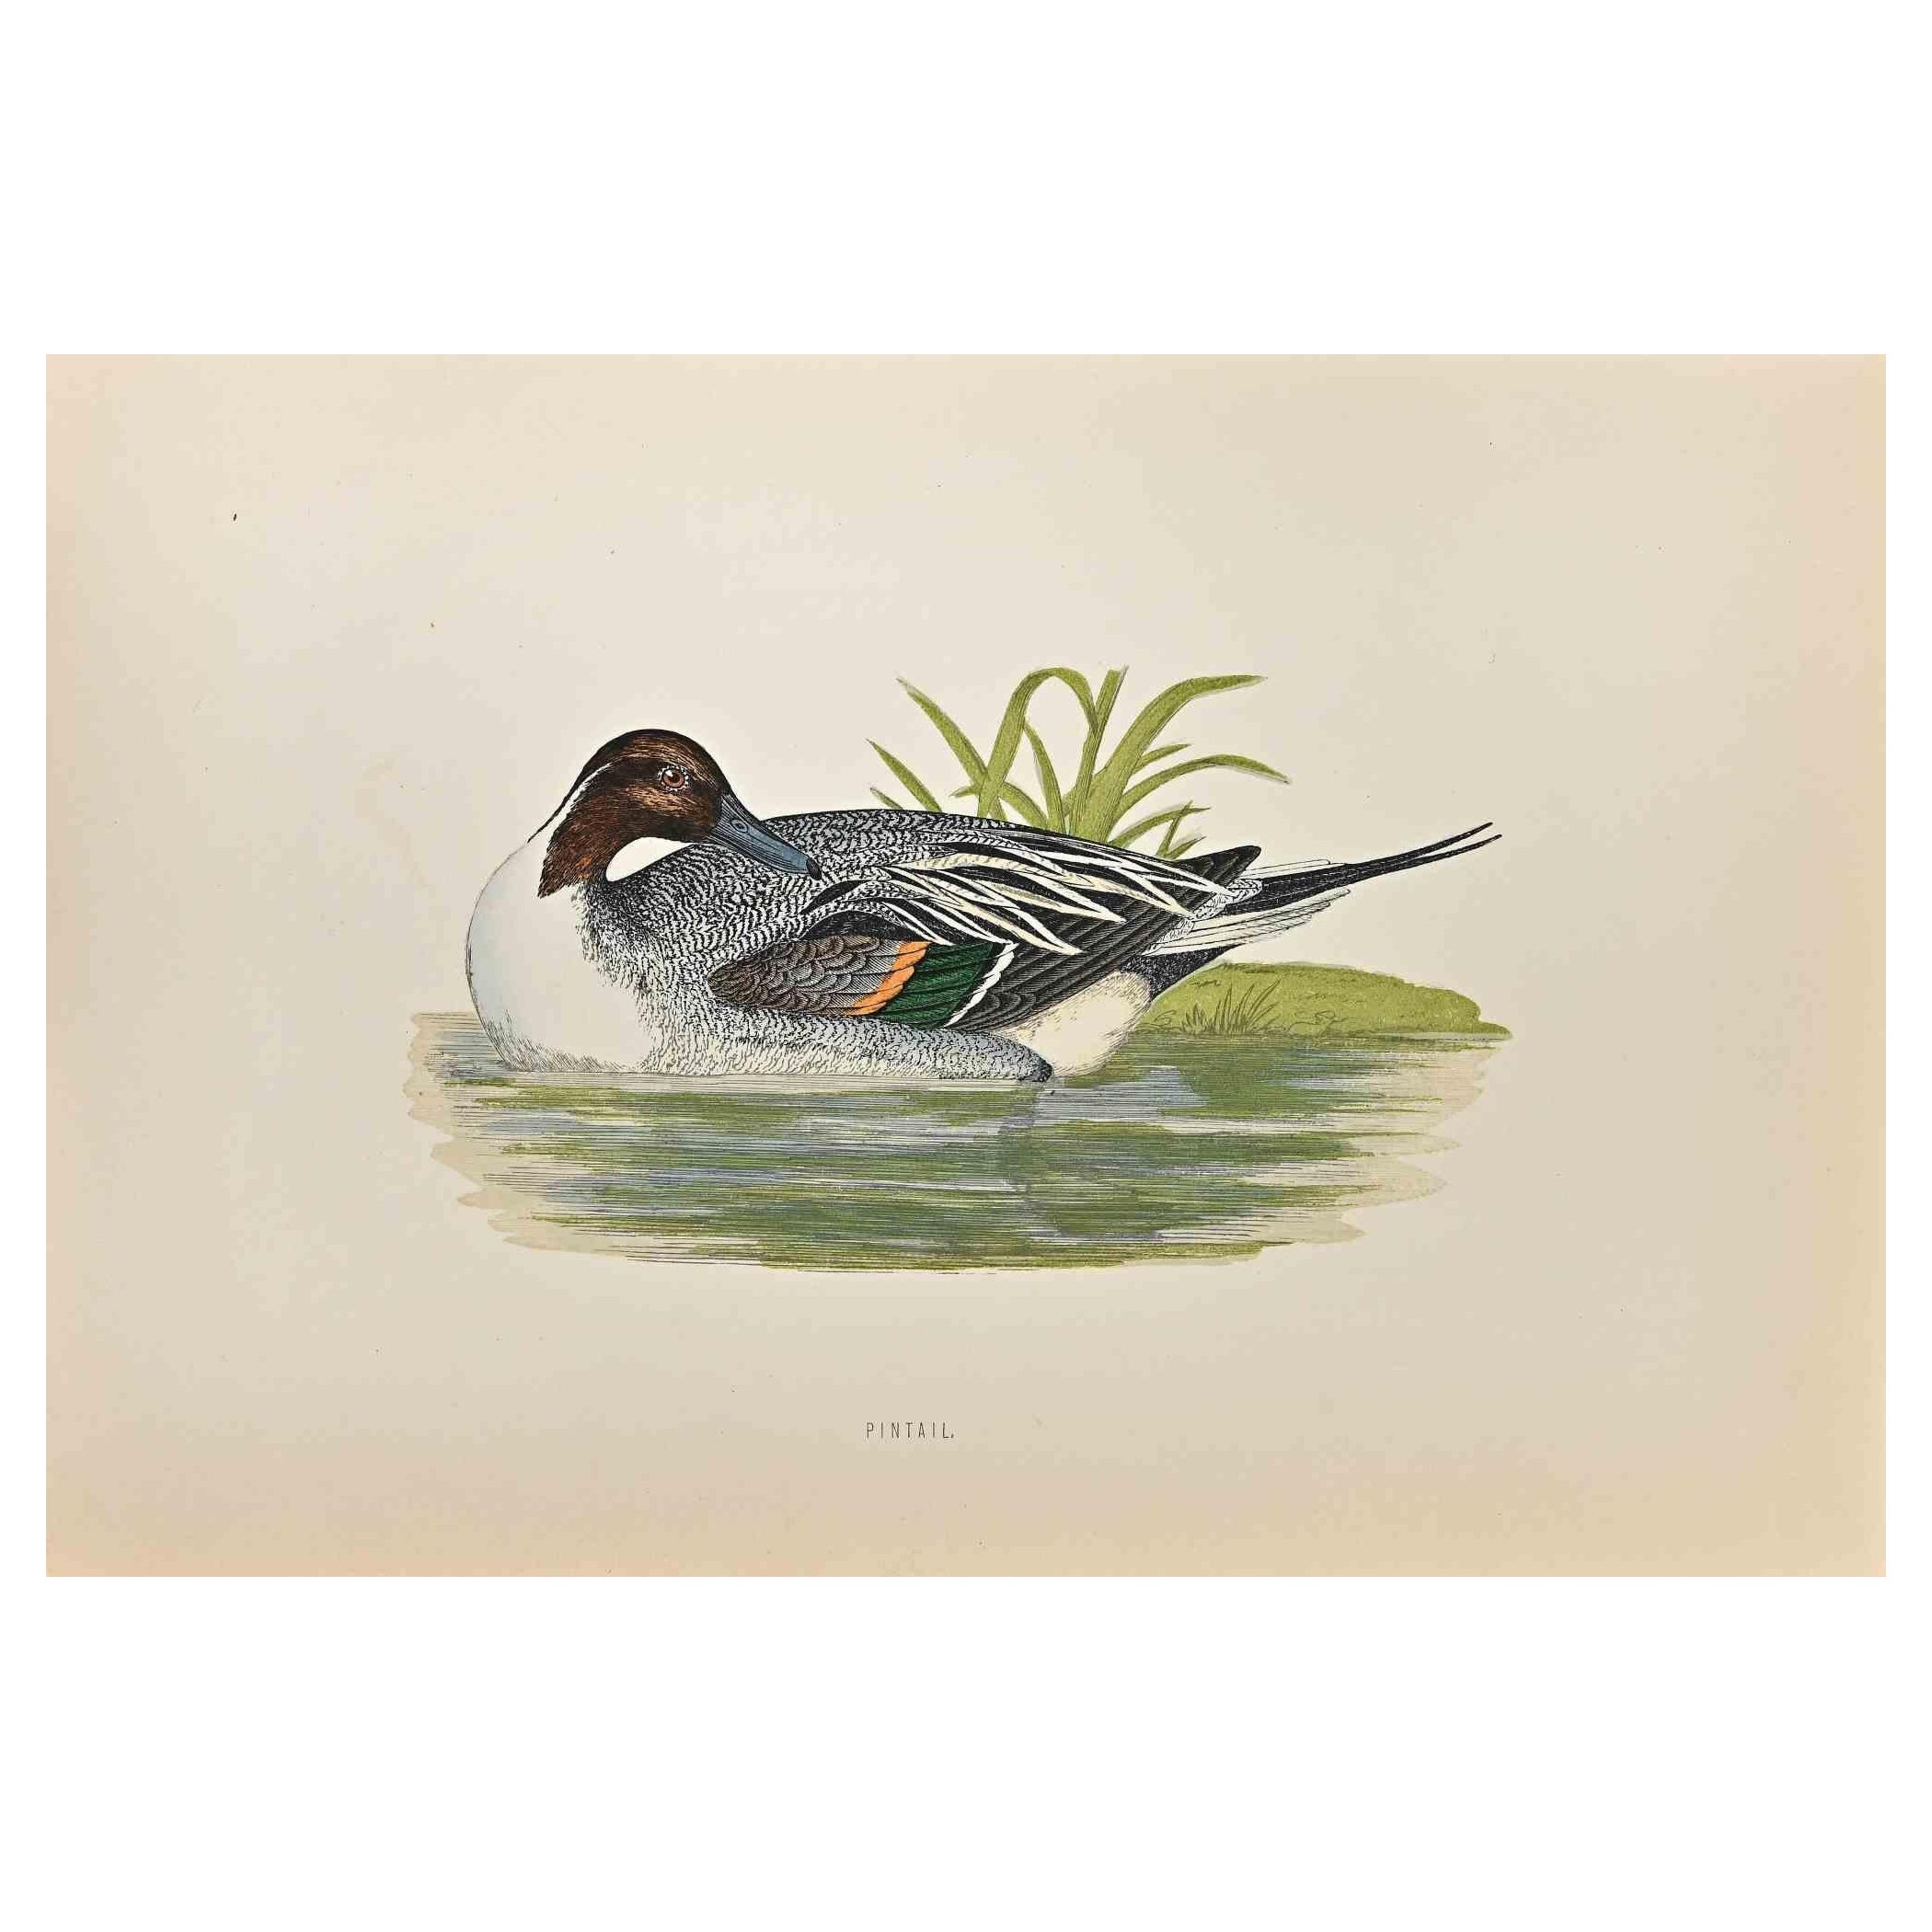 Pintail is a modern artwork realized in 1870 by the British artist Alexander Francis Lydon (1836-1917) . 

Woodcut print on ivory-colored paper.

Hand-colored, published by London, Bell & Sons, 1870.  

The name of the bird is printed on the plate.